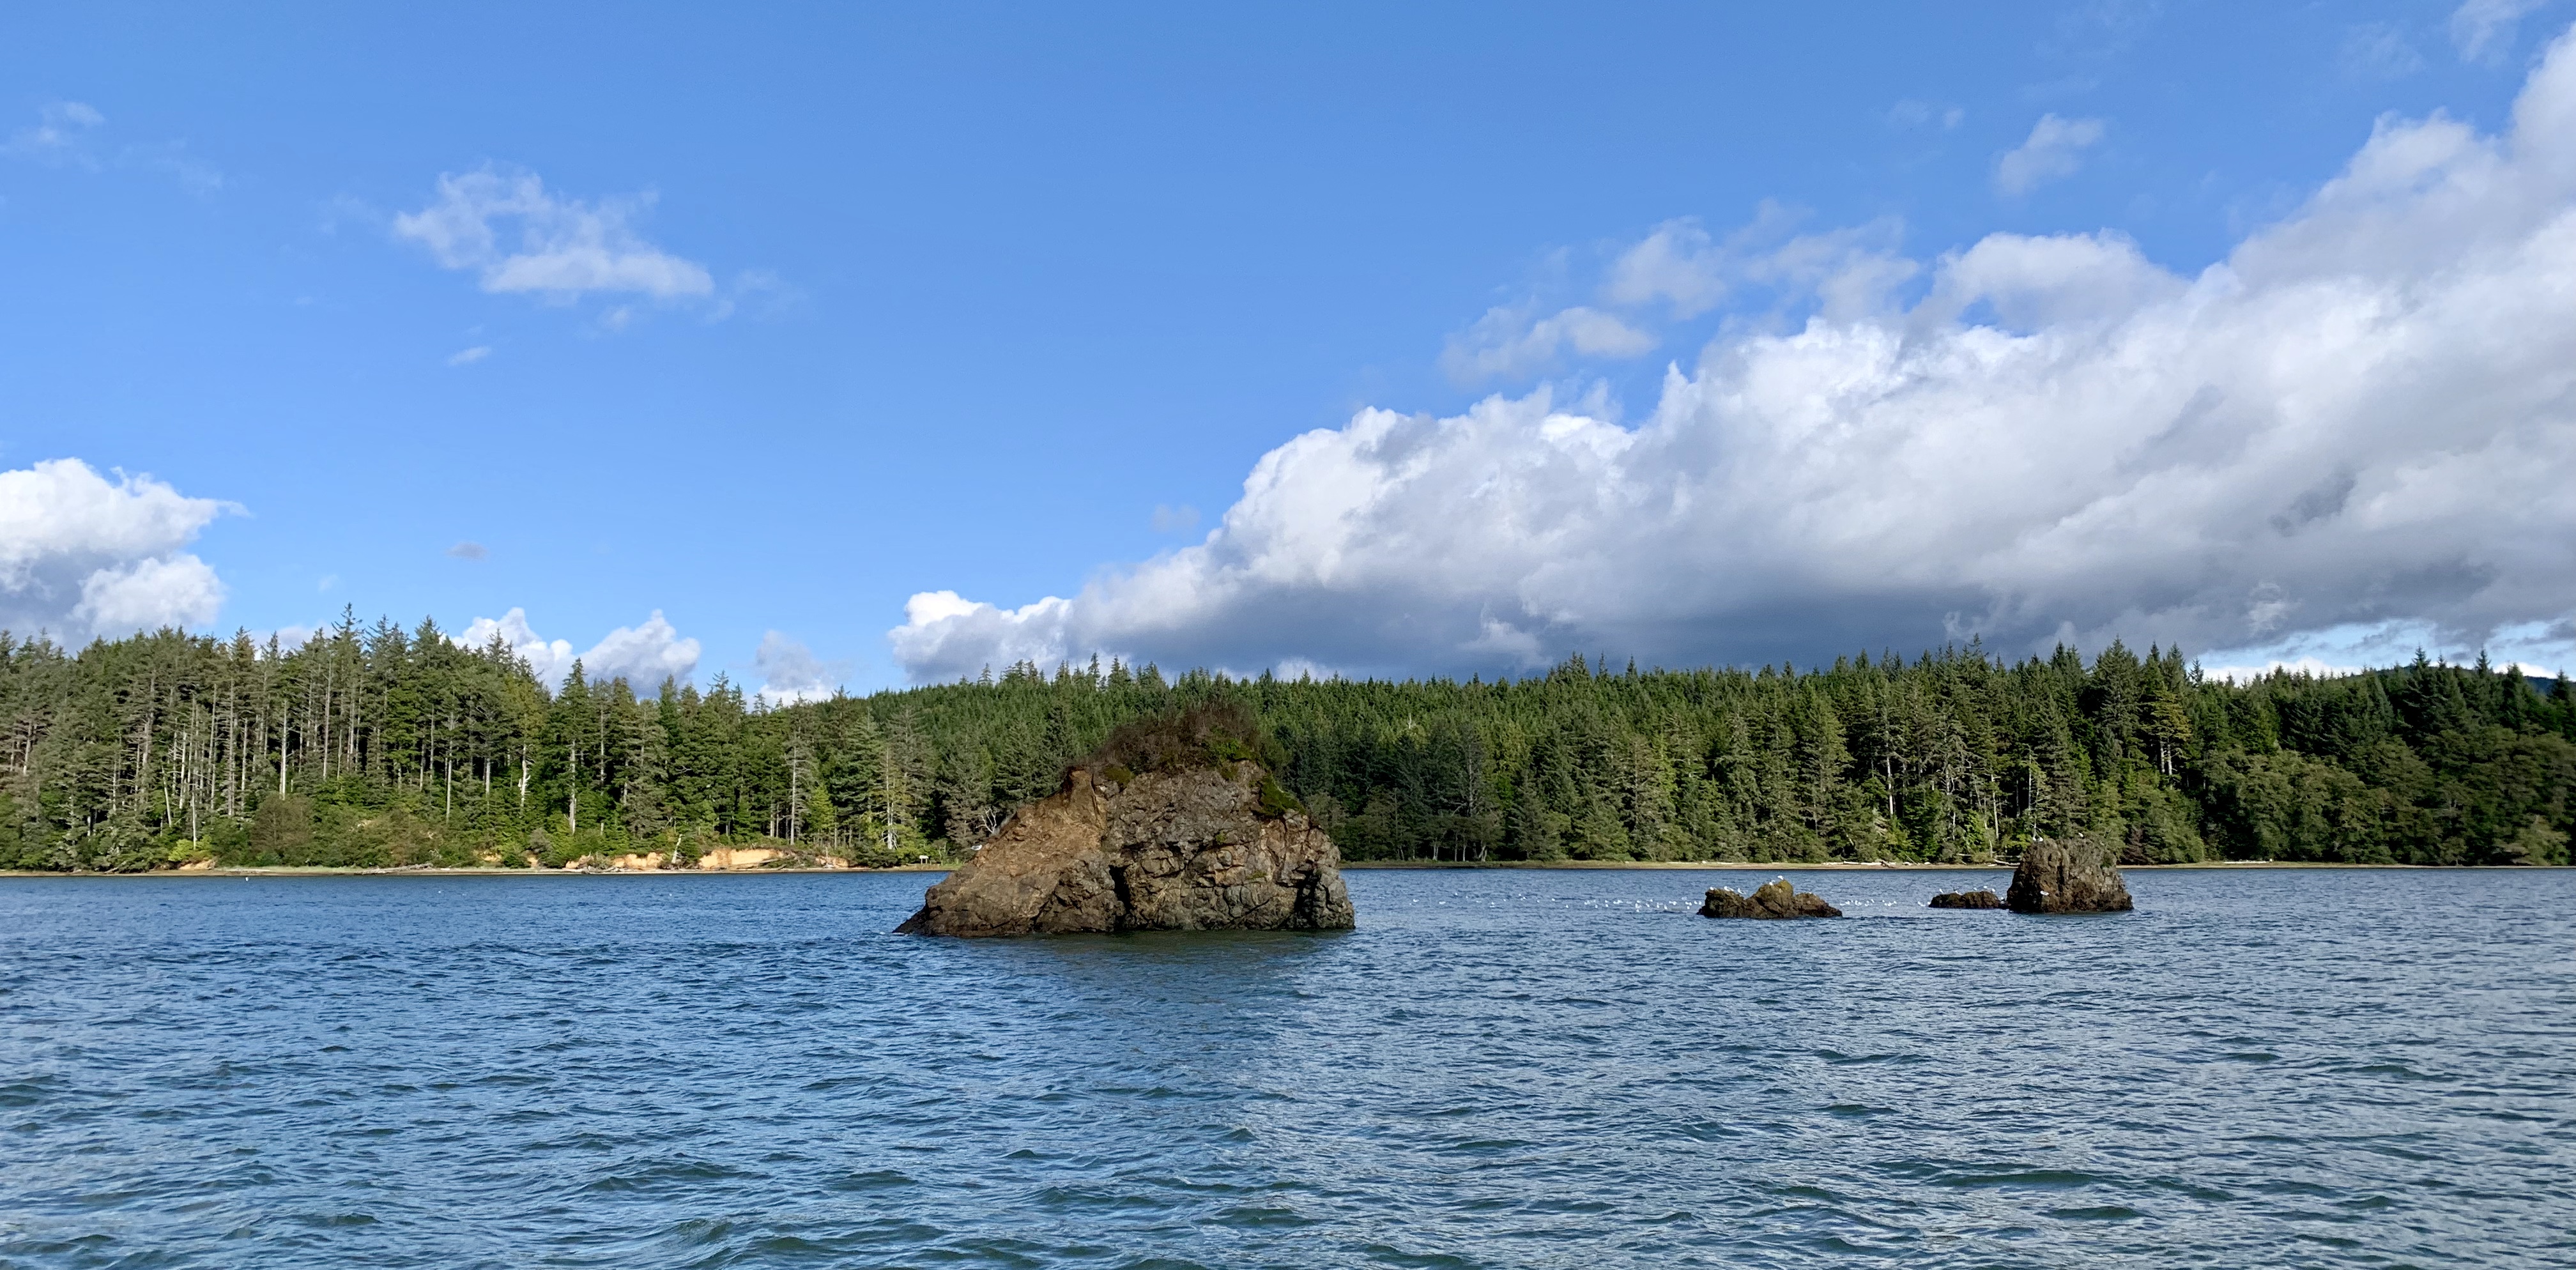 A few large rocks jut out of blue water, with green pine trees and a blue sky with white clouds in the background 